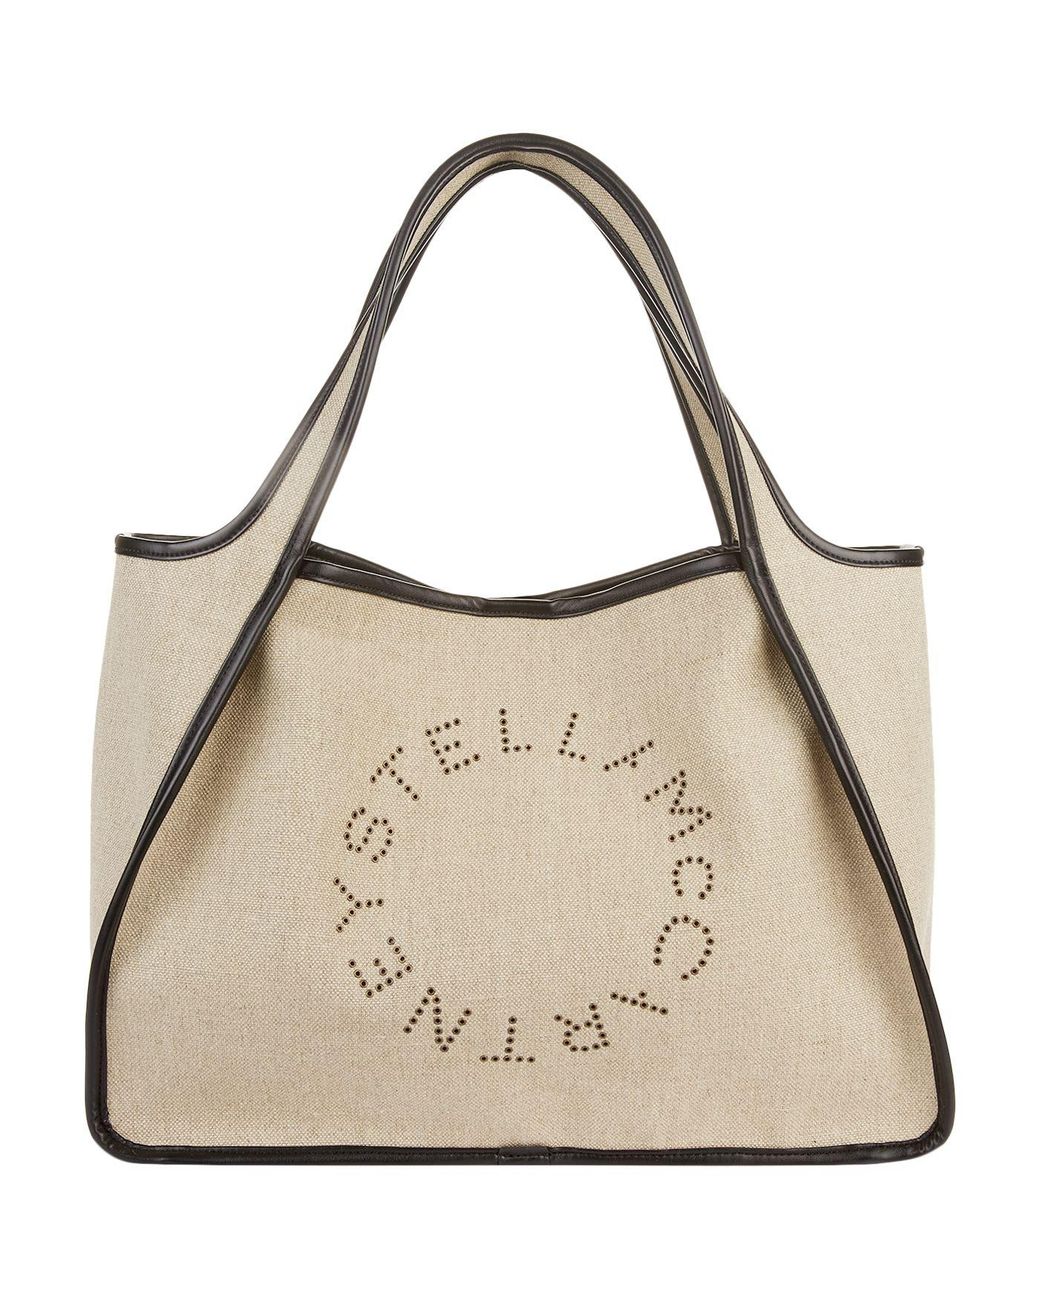 Stella McCartney Canvas Tote Bag in Natural | Lyst